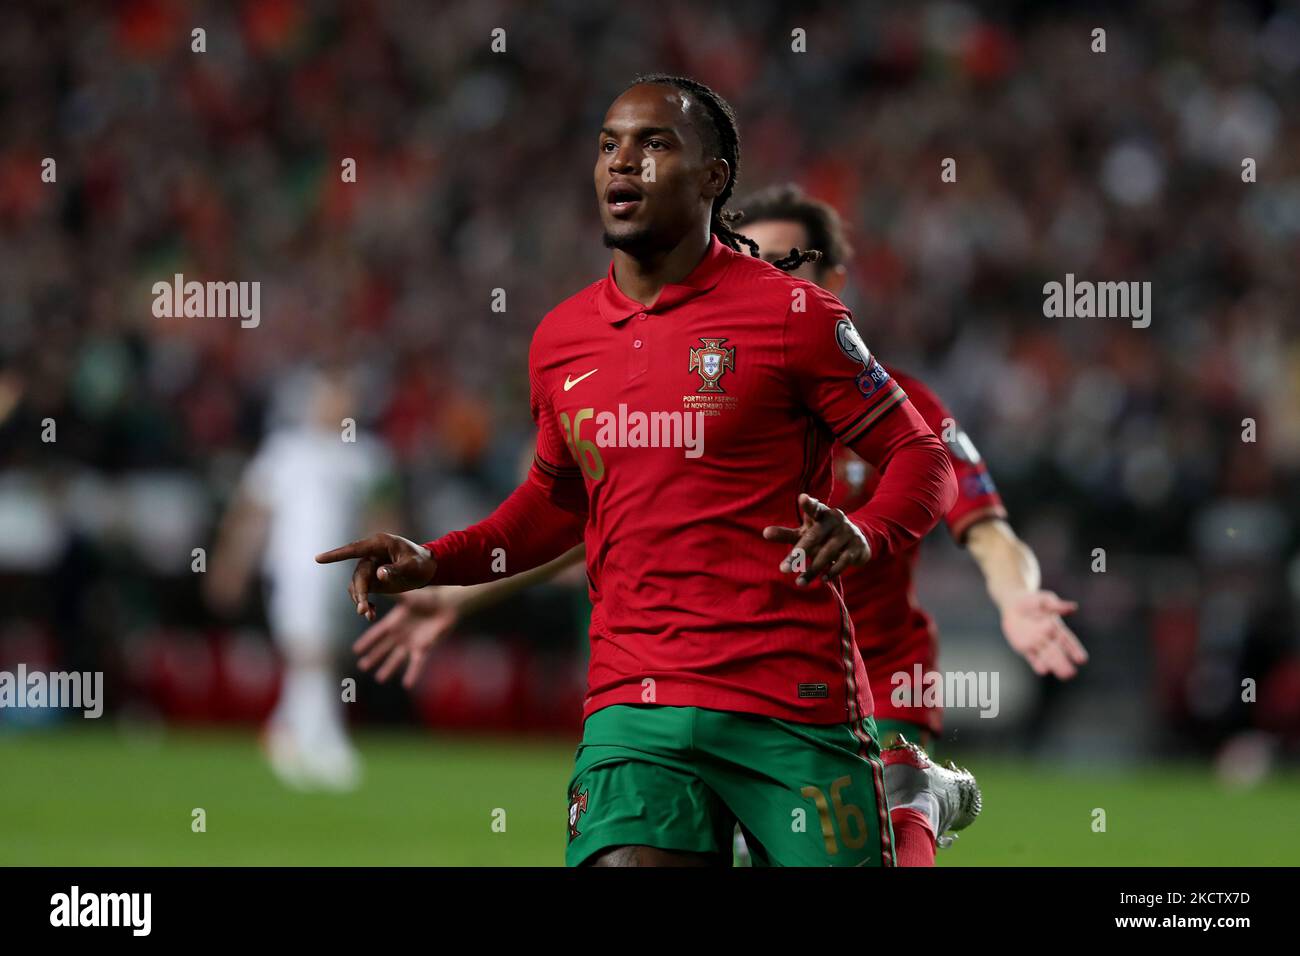 Portugal's midfielder Renato Sanches celebrates after scoring a goal during the FIFA World Cup Qatar 2022 qualification group A football match between Portugal and Serbia at the Luz stadium in Lisbon, Portugal, on November 14, 2021. (Photo by Pedro FiÃºza/NurPhoto) Stock Photo